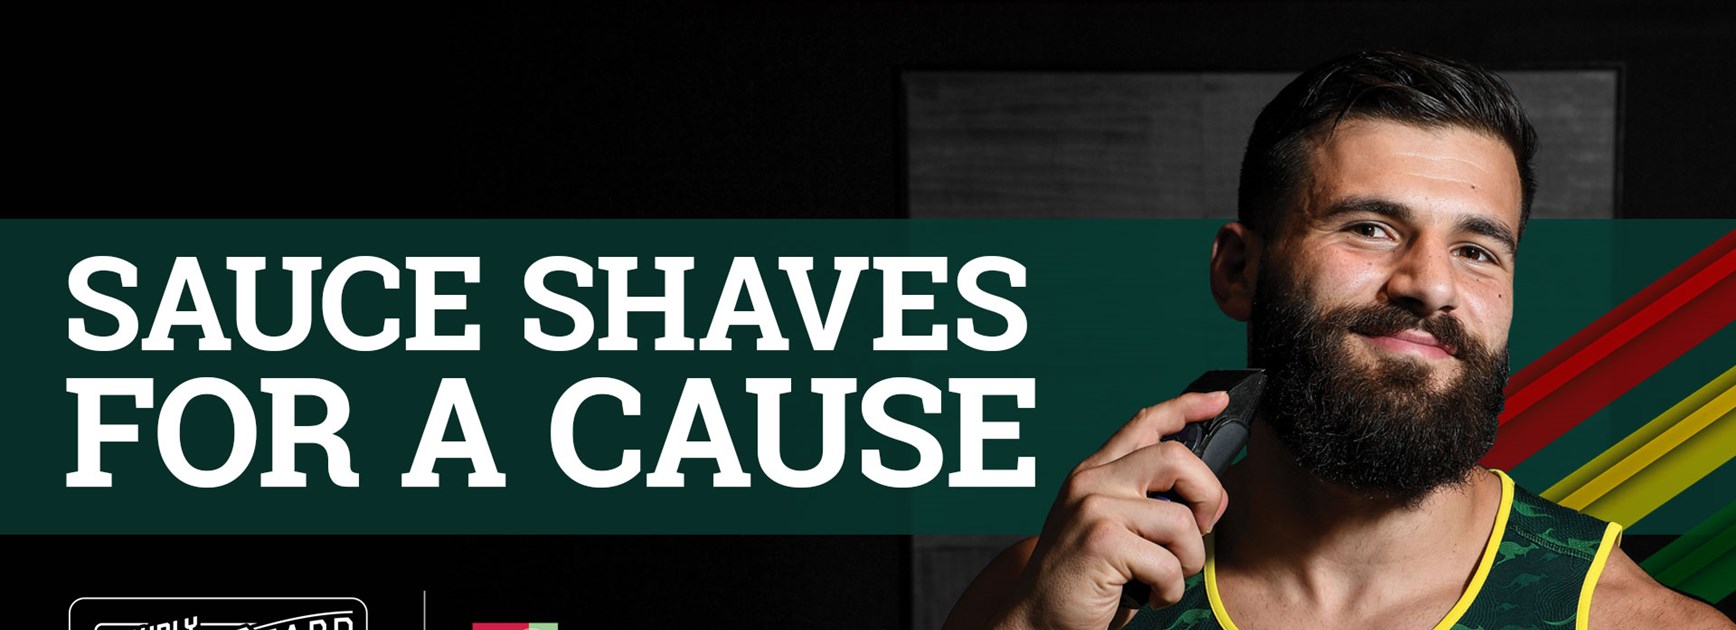 Josh Mansour is shaving his beard for a good cause in December.